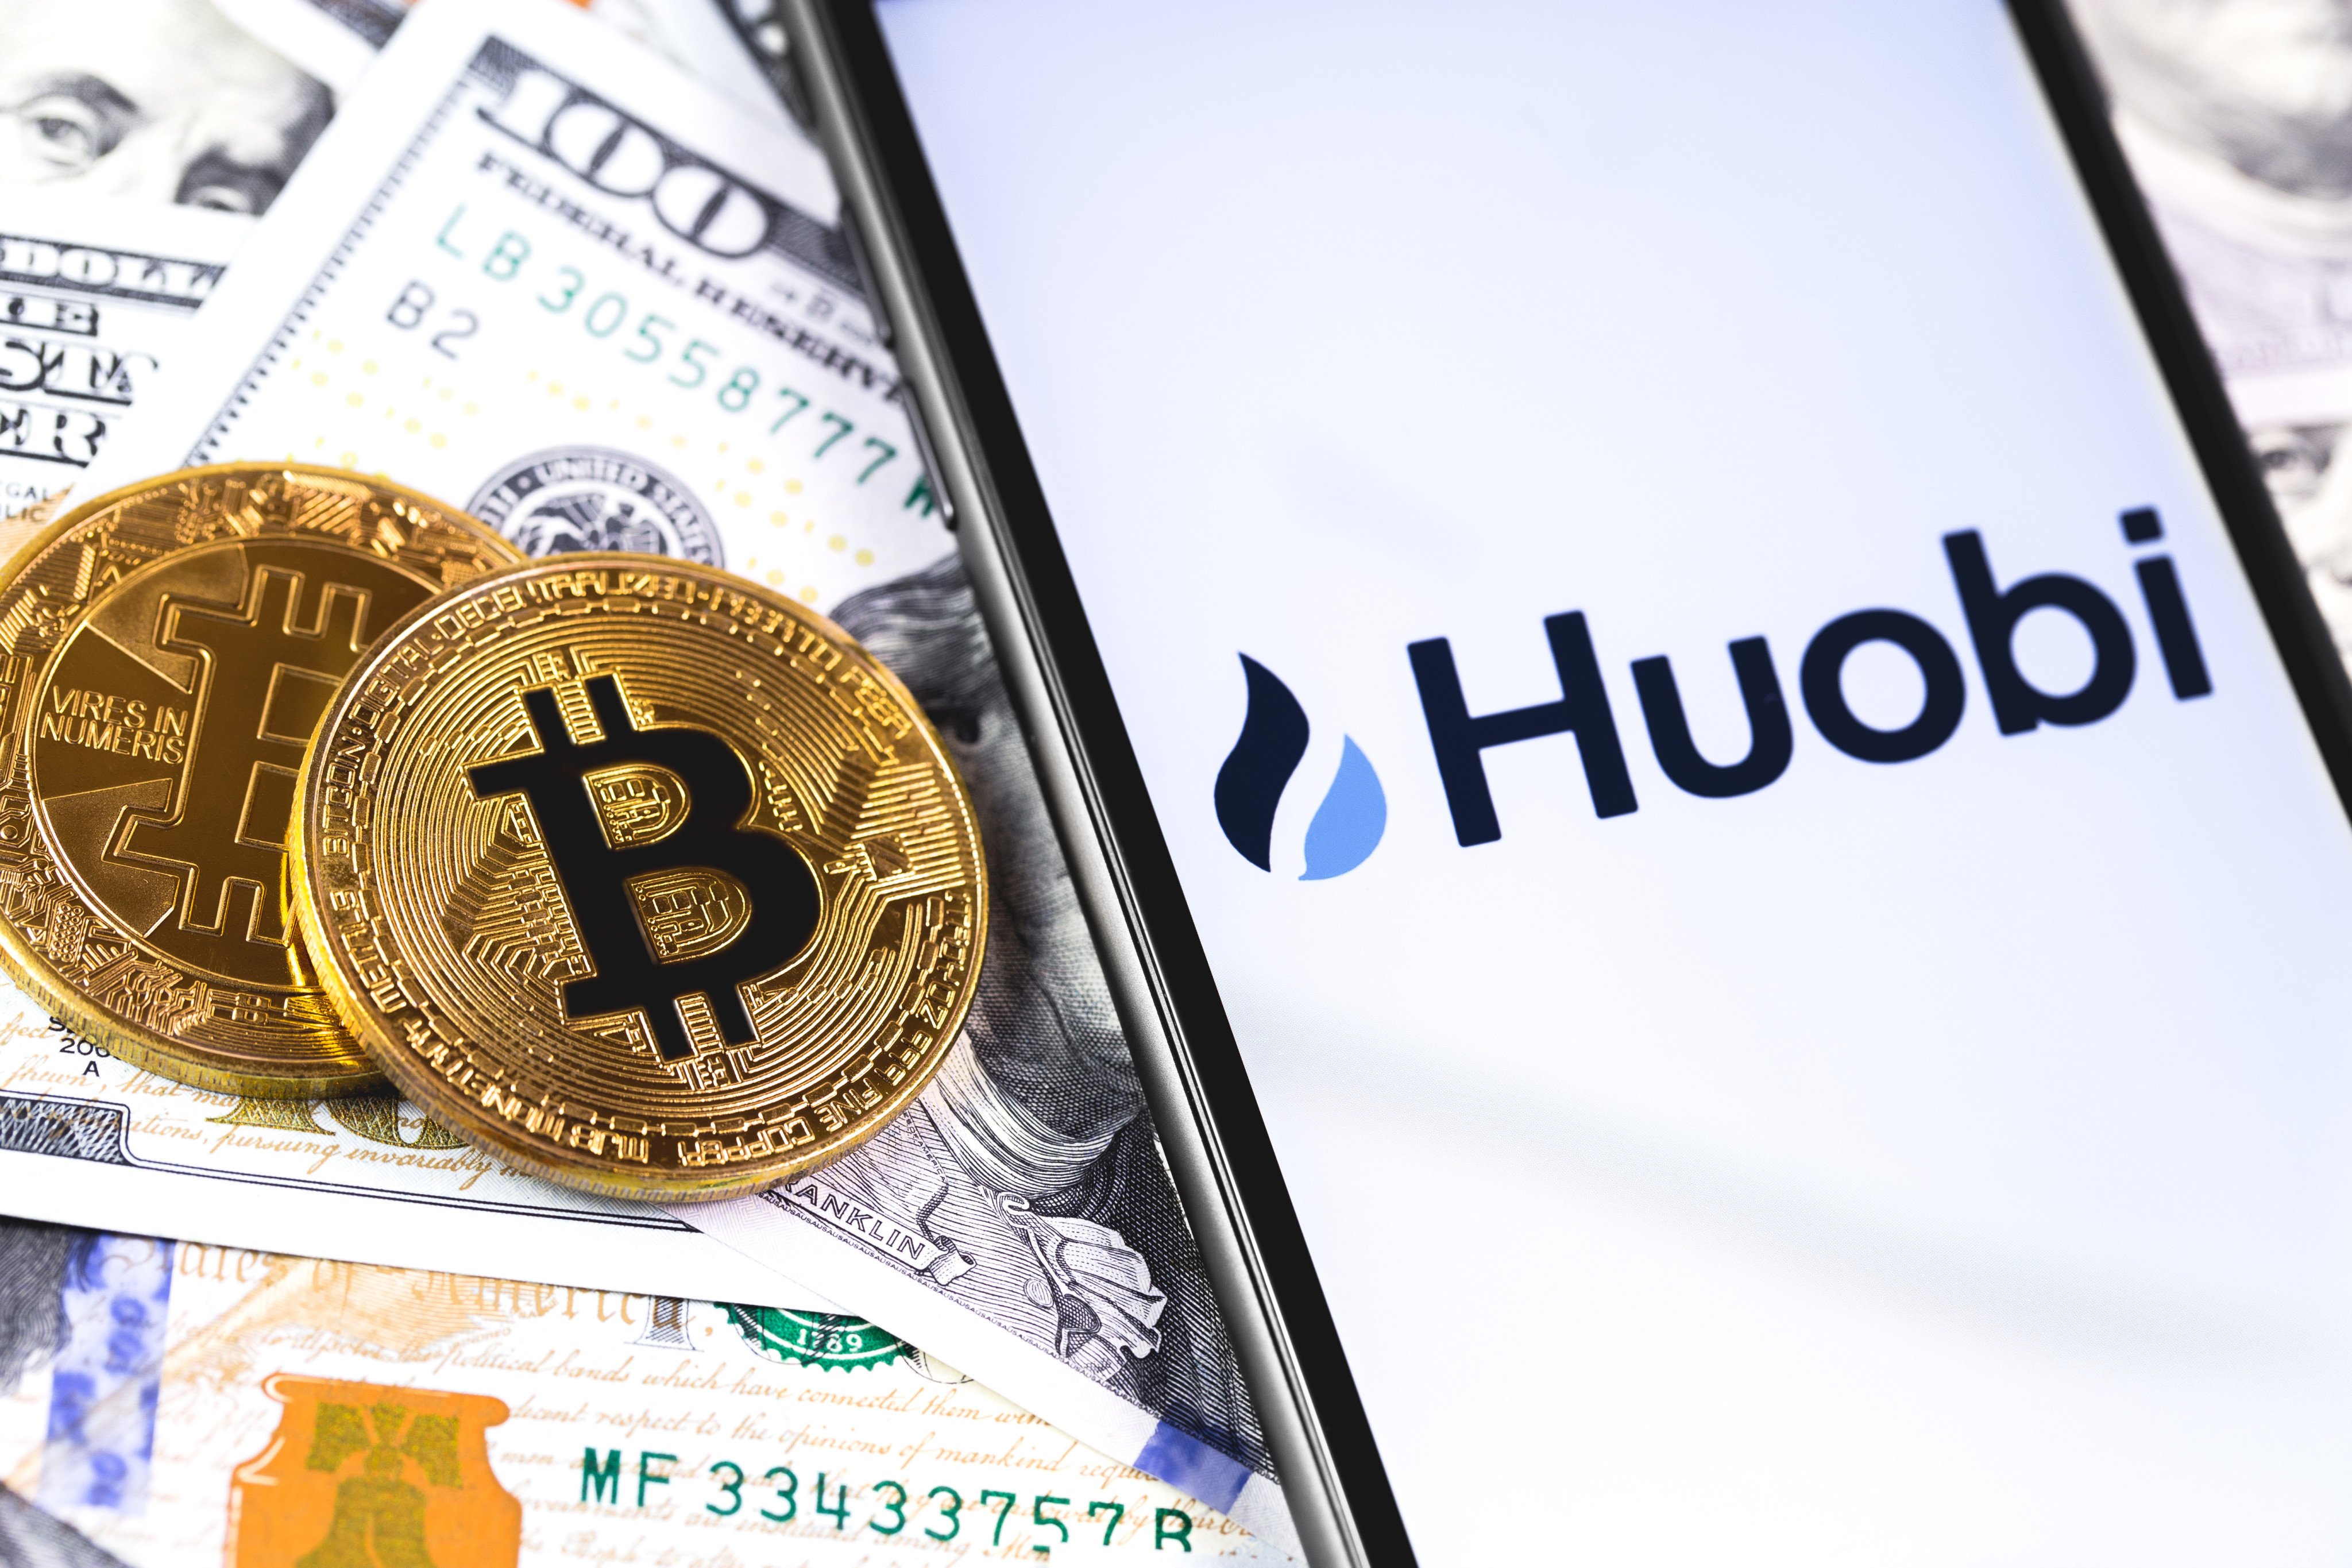 HTX, formerly Huobi Global, is one of the world’s largest cryptocurrency exchanges. Photo: Shutterstock